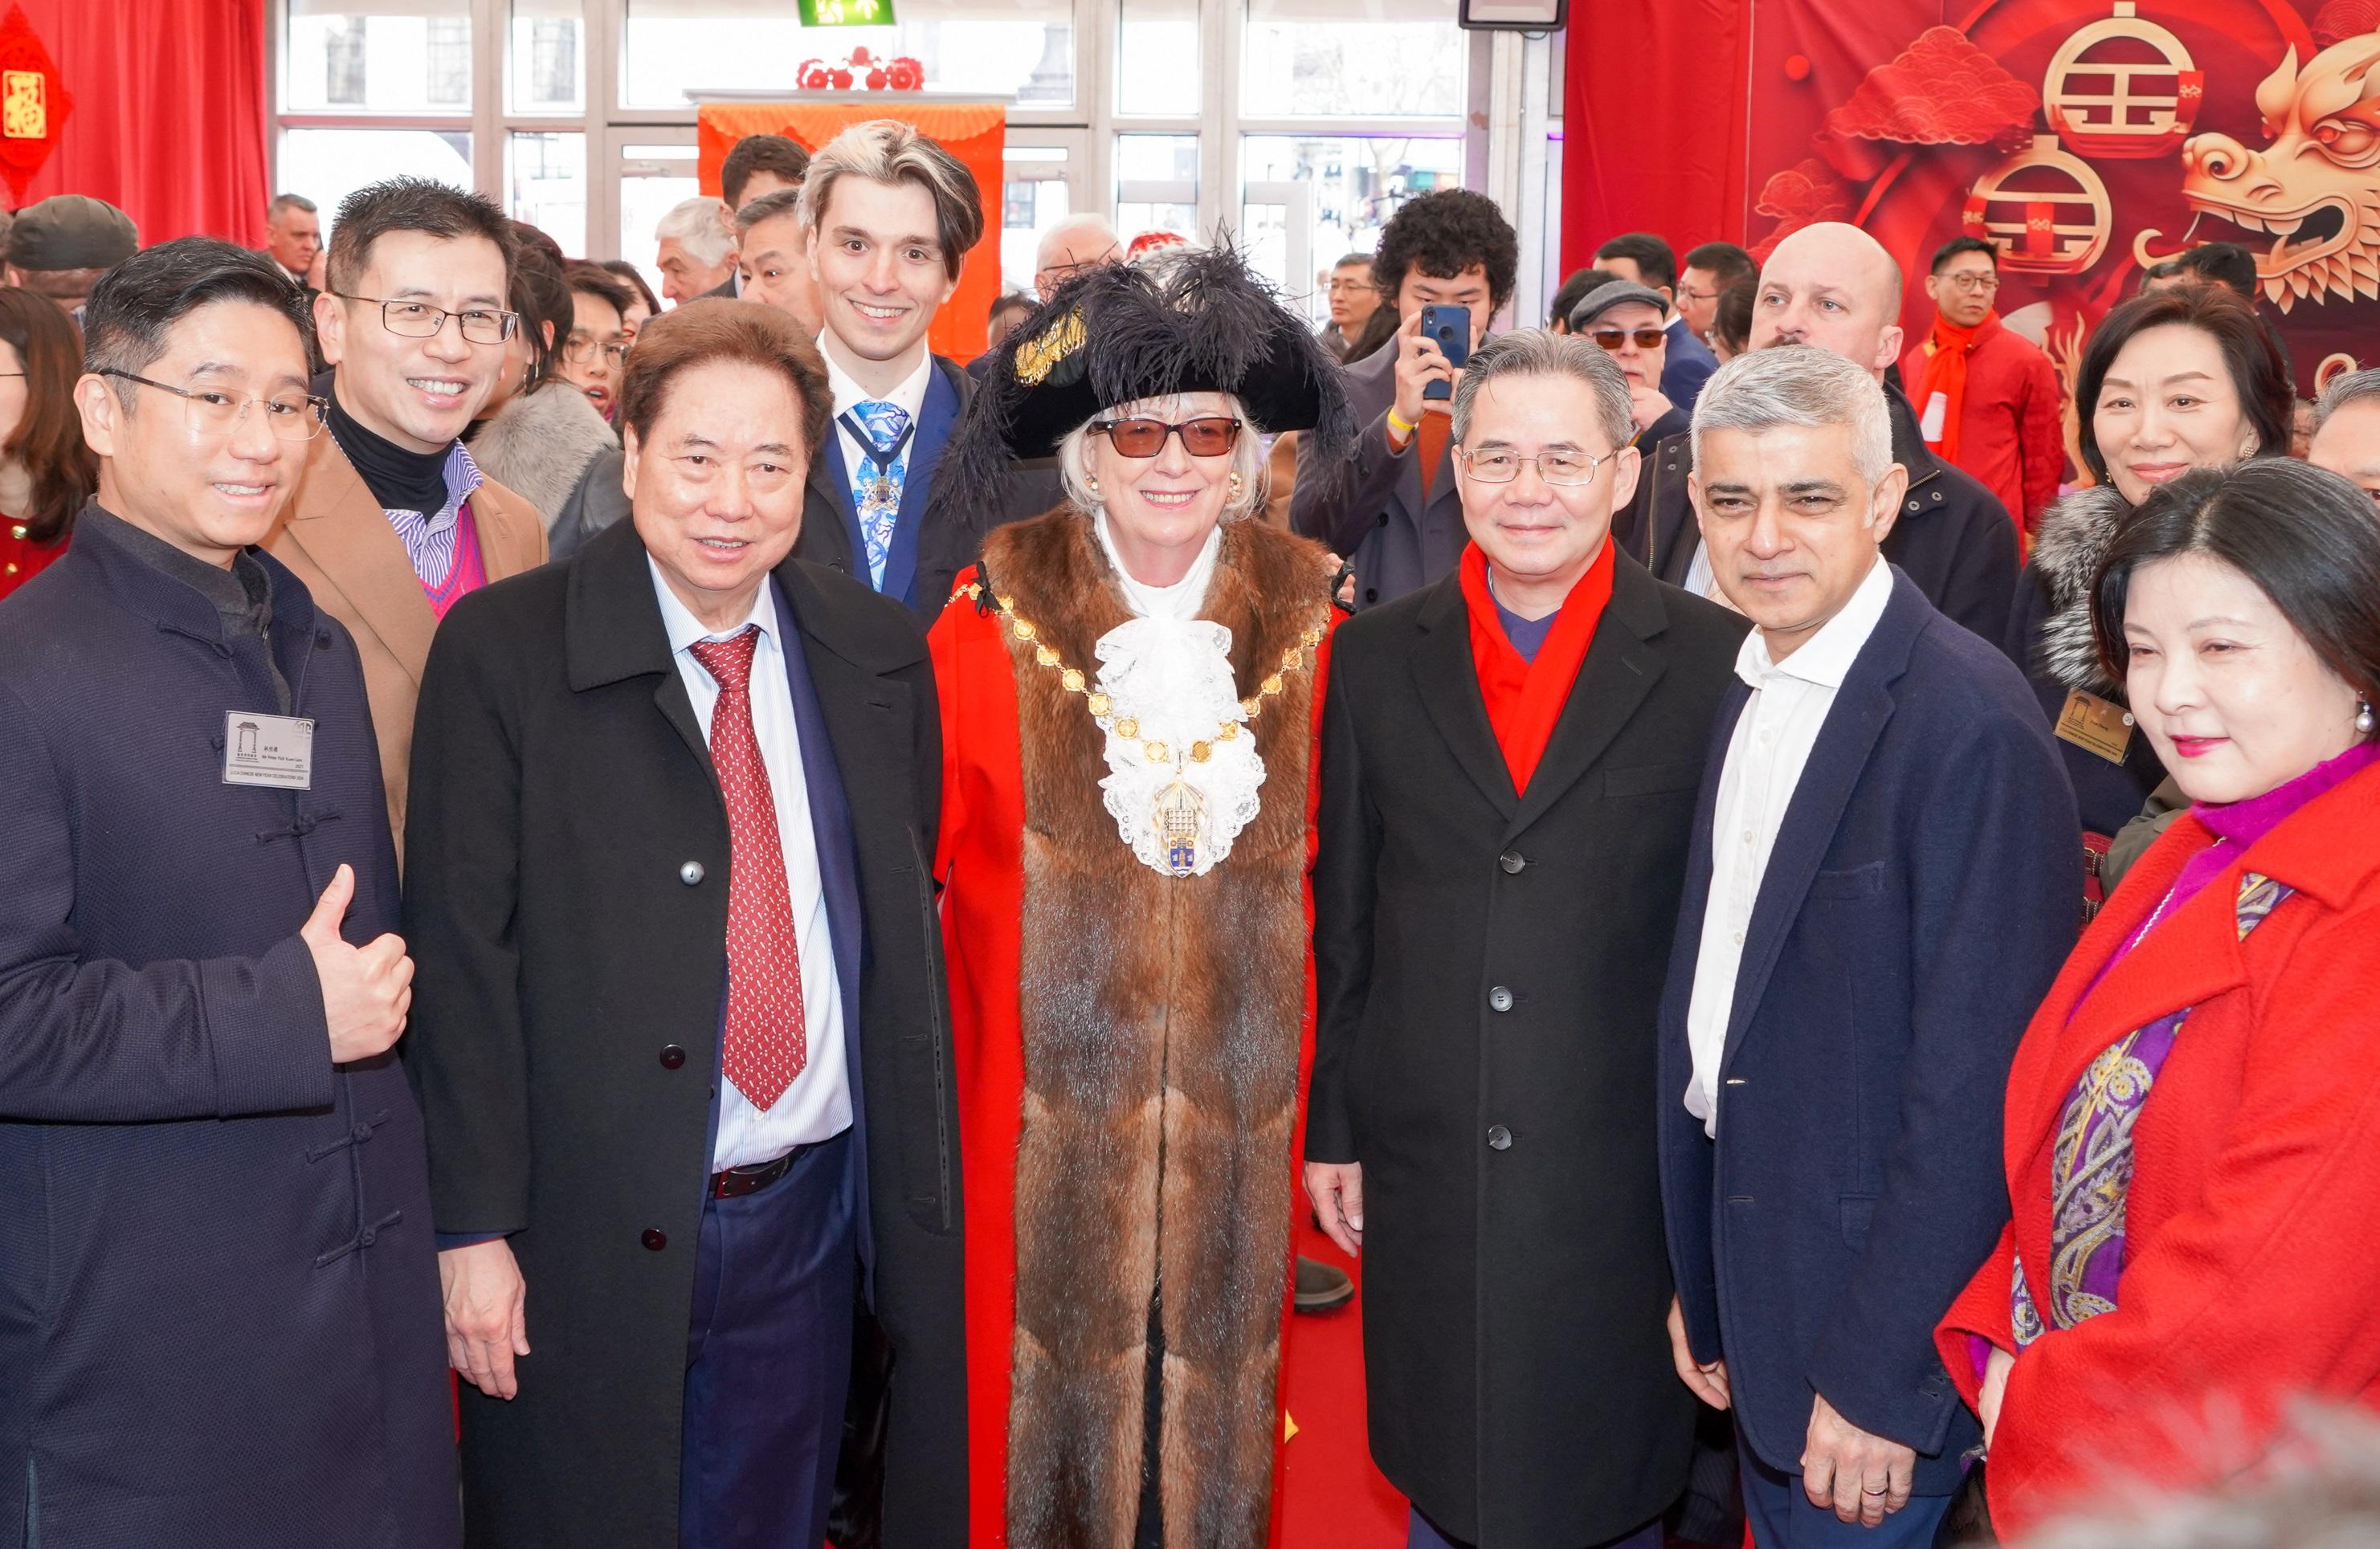 The Hong Kong Economic and Trade Office, London (London ETO) participated in a large-scale London Chinatown celebration in Trafalgar Square, Chinatown and Charing Cross Road on February 11 (London time). Photo shows (from left) the President of the London Chinatown Chinese Association (LCCA), Mr Peter Lam; the Director-General of the London ETO, Mr Gilford Law; the Chairman of the LCCA, Mr Tang Chu-ting; Councillor of Westminster Mr Robert Eagleton; the Lord Mayor of Westminster, Ms Patricia McAllister; the Chinese Ambassador to the United Kingdom, Mr Zheng Zeguang; the Mayor of London, Mr Sadiq Khan, and other guests at the celebration.